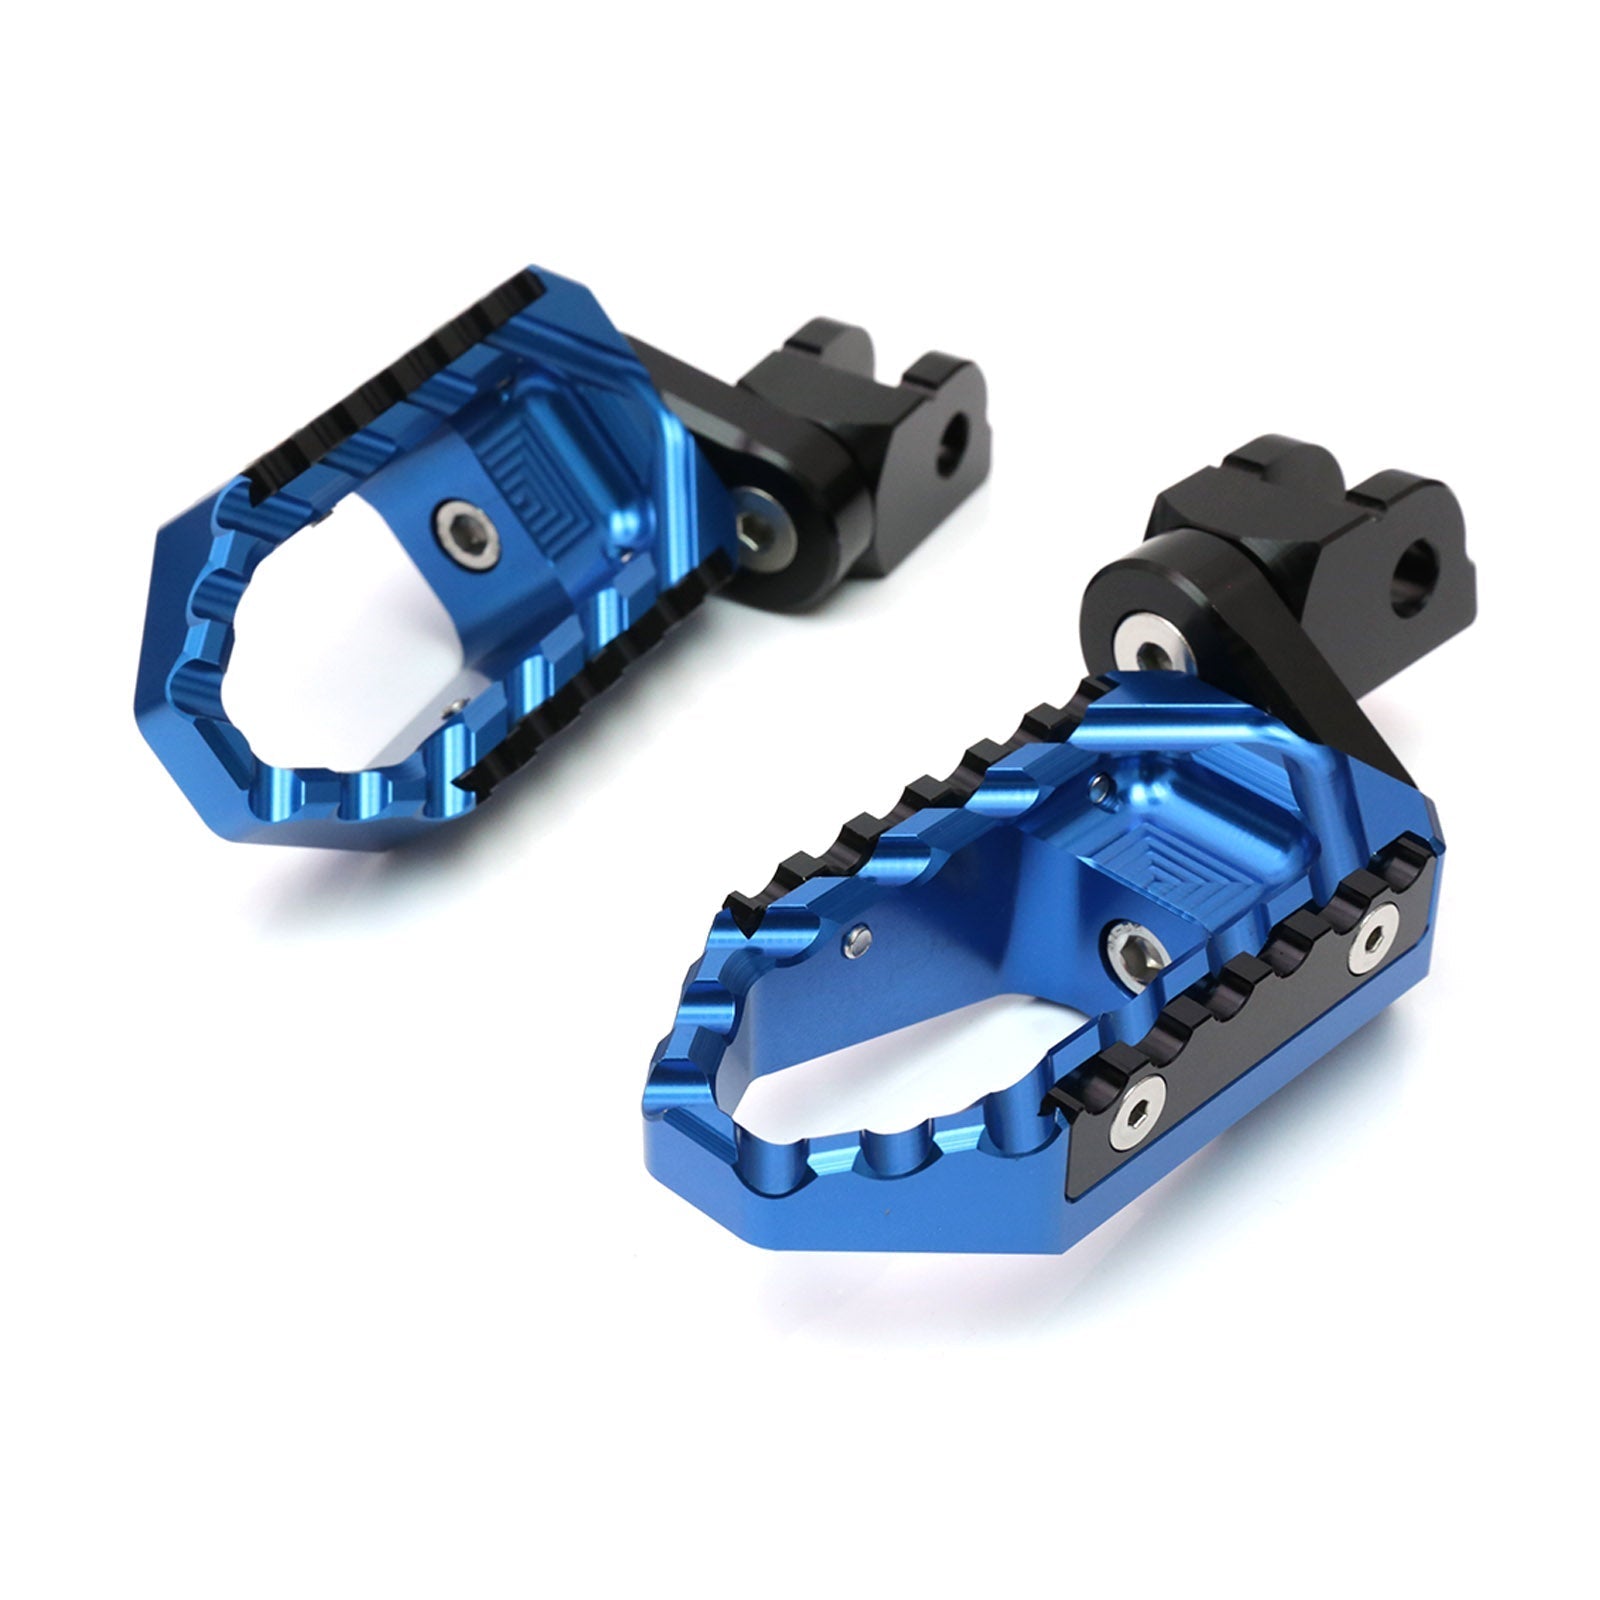 Fit Razor RSF350 RSF650 Touring 25mm Adjustable Extended Extension Lowering Lower Front Foot Pegs Footpegs Electric Dirt Bike MC Motoparts